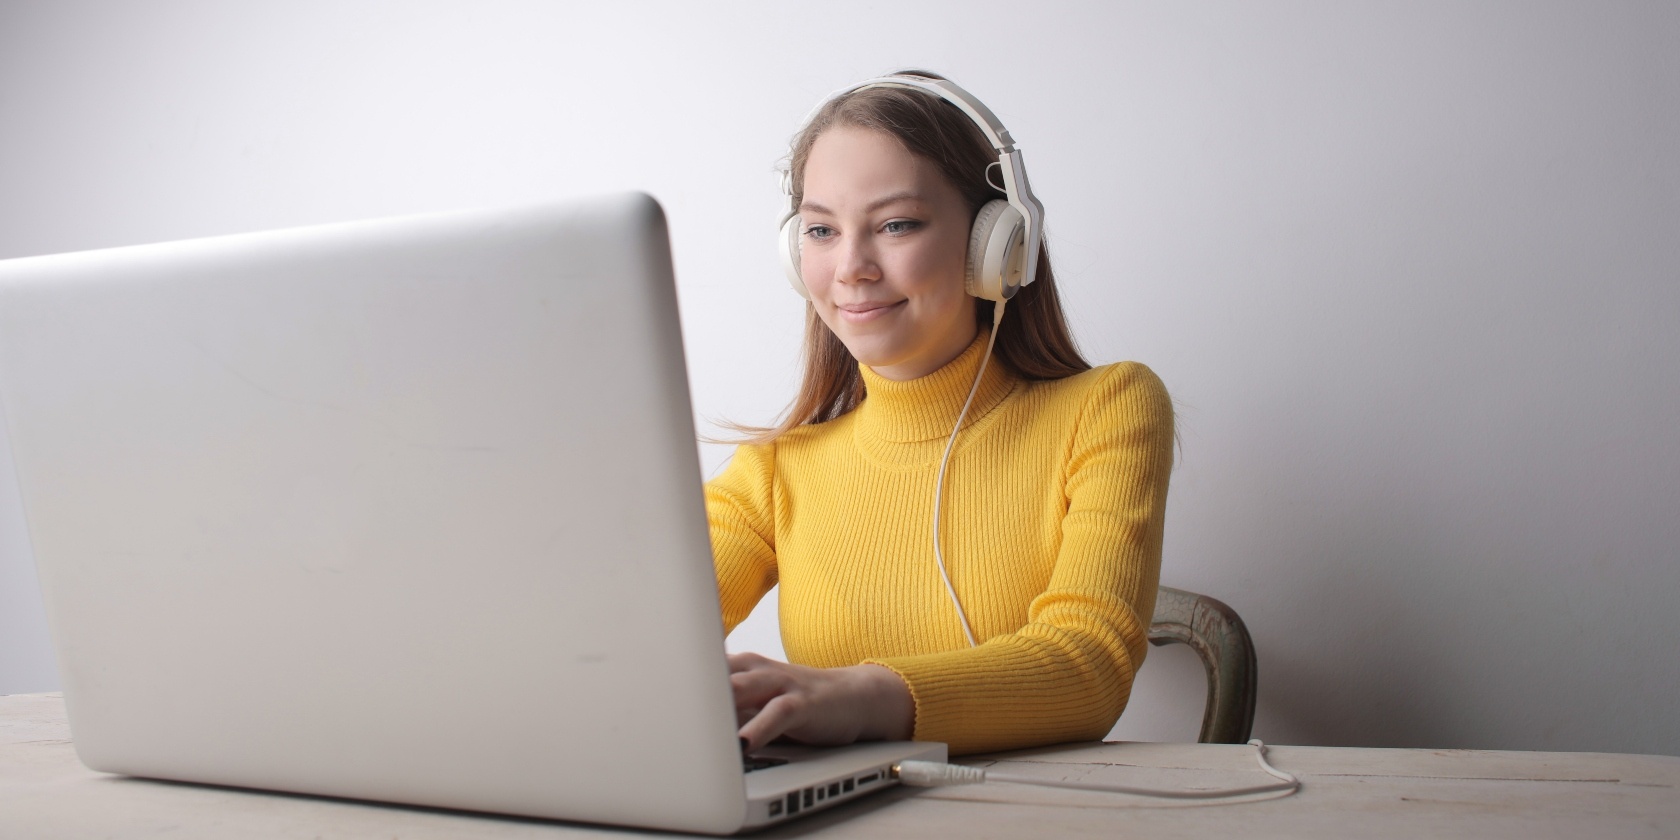 How To Record Streaming Music On Laptop